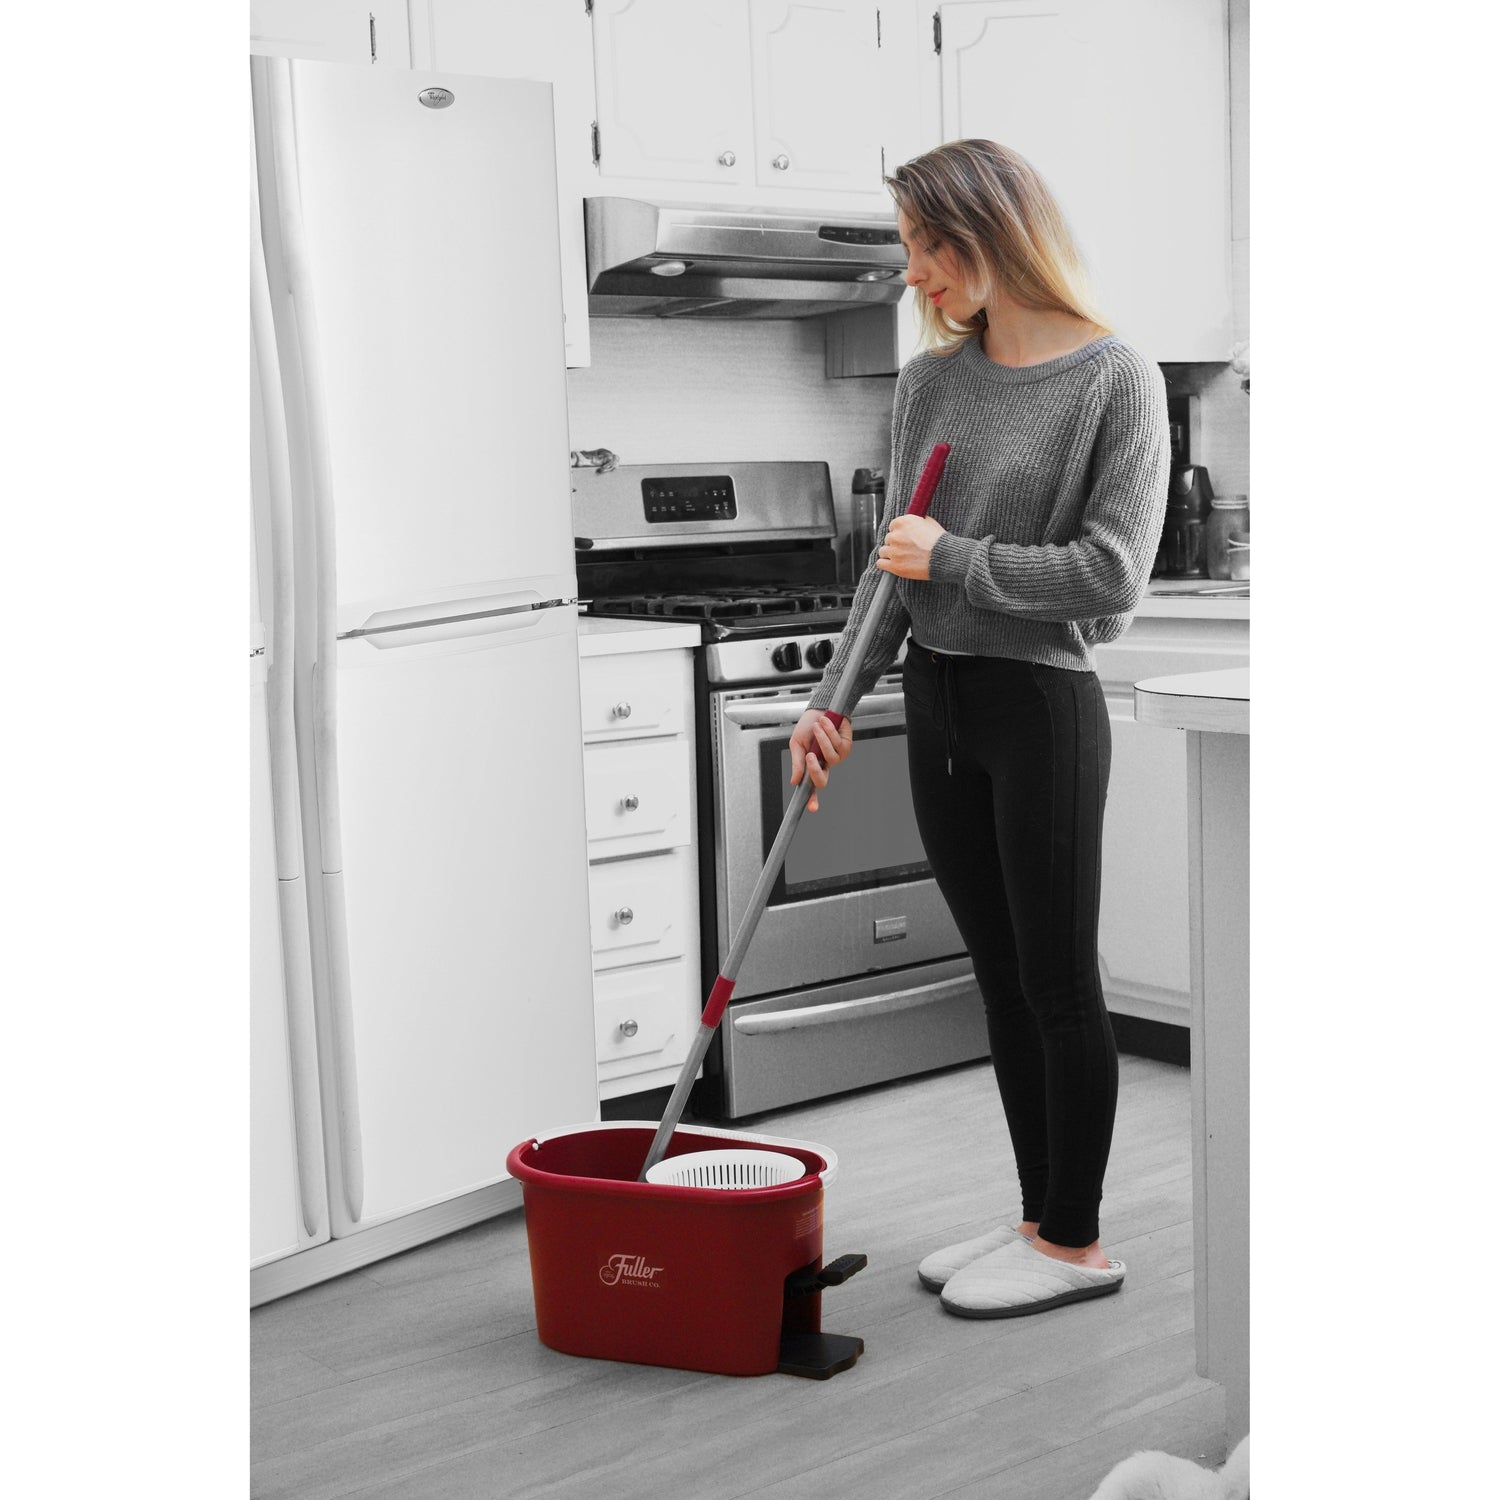 Spin Mop Bucket, 360 Spin Mop and Bucket System with 3 Mop Heads, Stainless Steel Spin Bucket Mop for Floor Cleaning